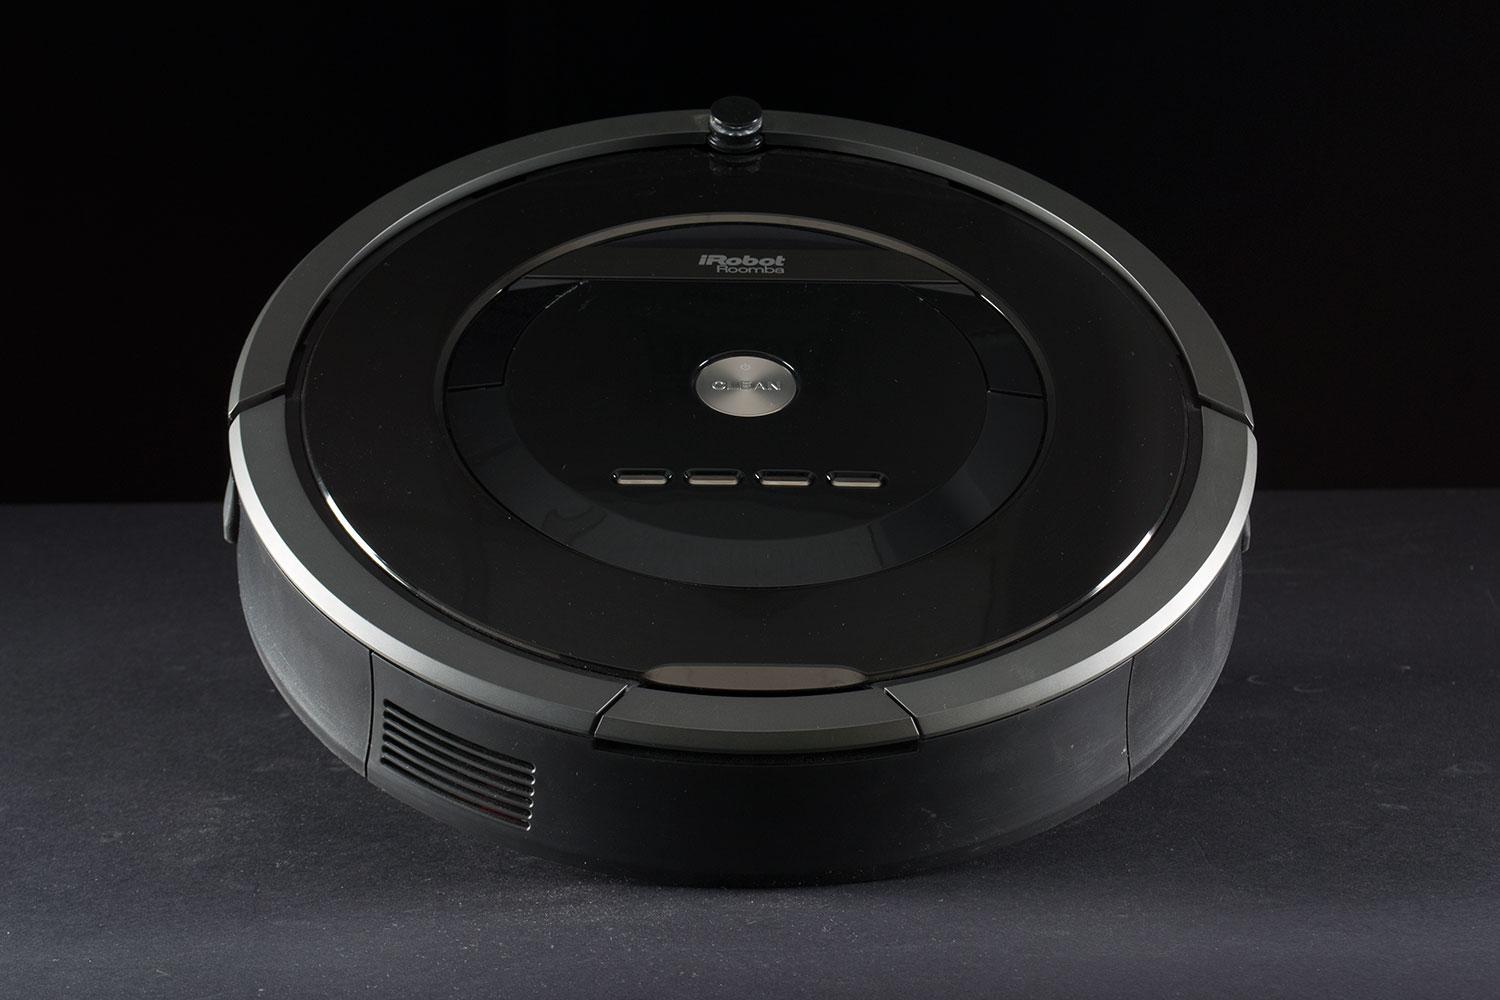 iRobot Roomba 880 review: This bot leaves the competition in the